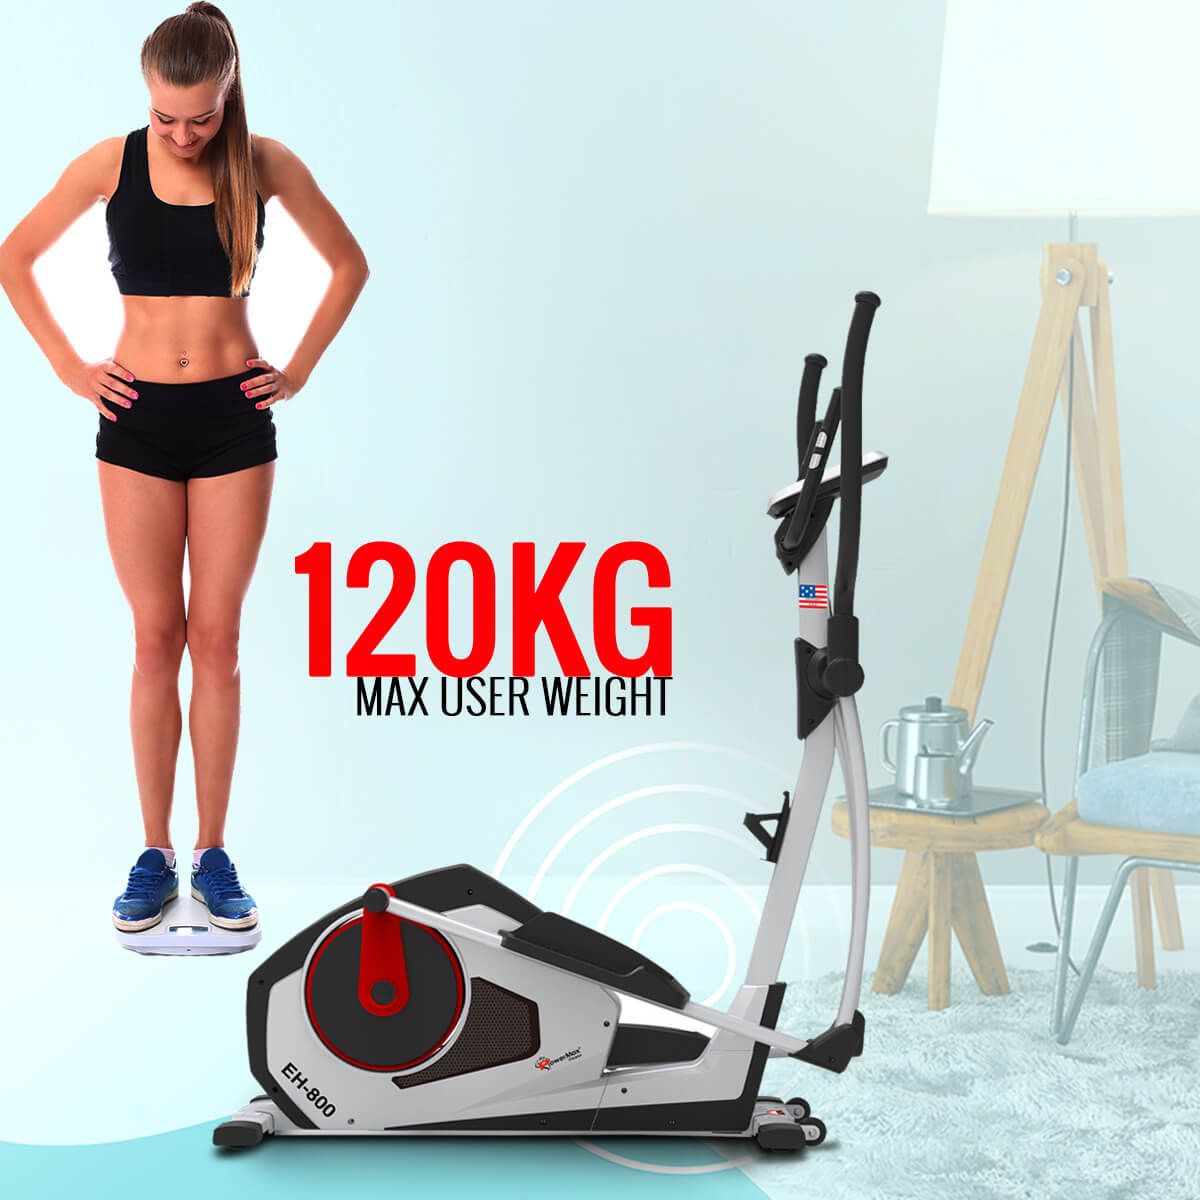 Buy Powermax Fitness EH-800 Motorized Elliptical Cross Trainer with Magnetic Resistance for home use